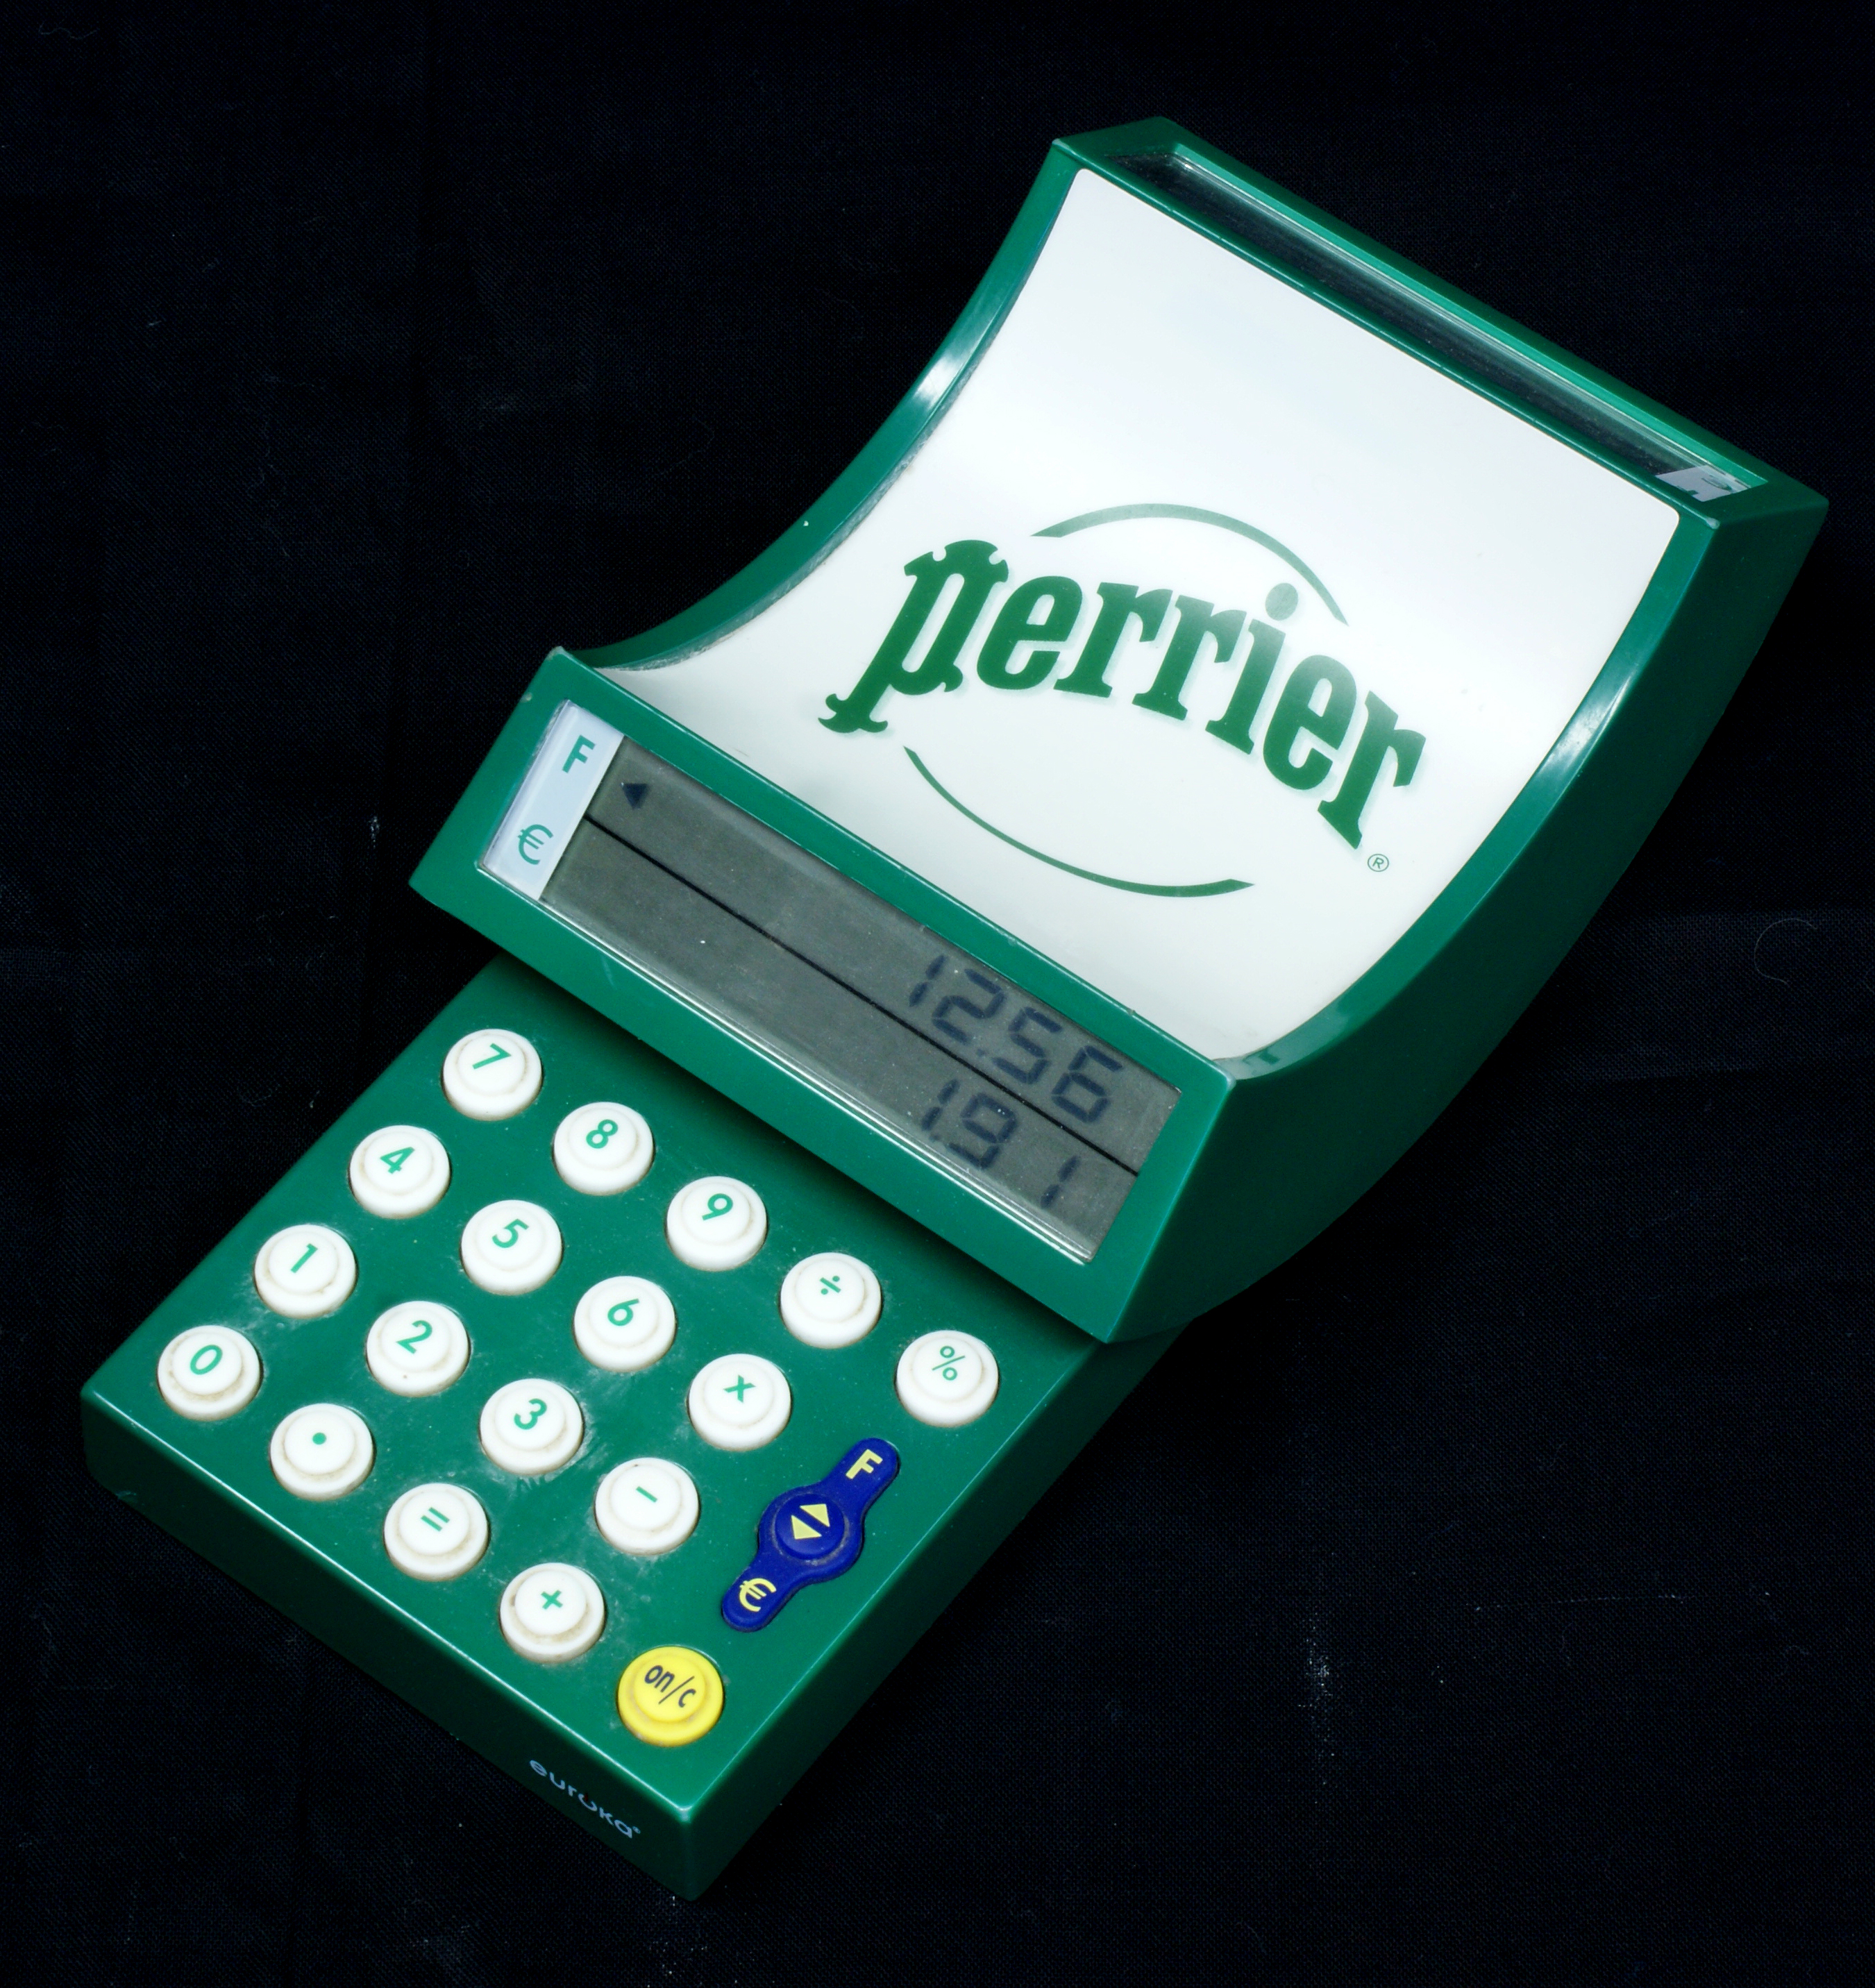 DSC07239.JPG - The item in the Computarium collection (donated by C. Heirendt) promotes the famous table water company Perrier. This item was in good shape, but the inside of the LCD screen covers needed some cleaning.